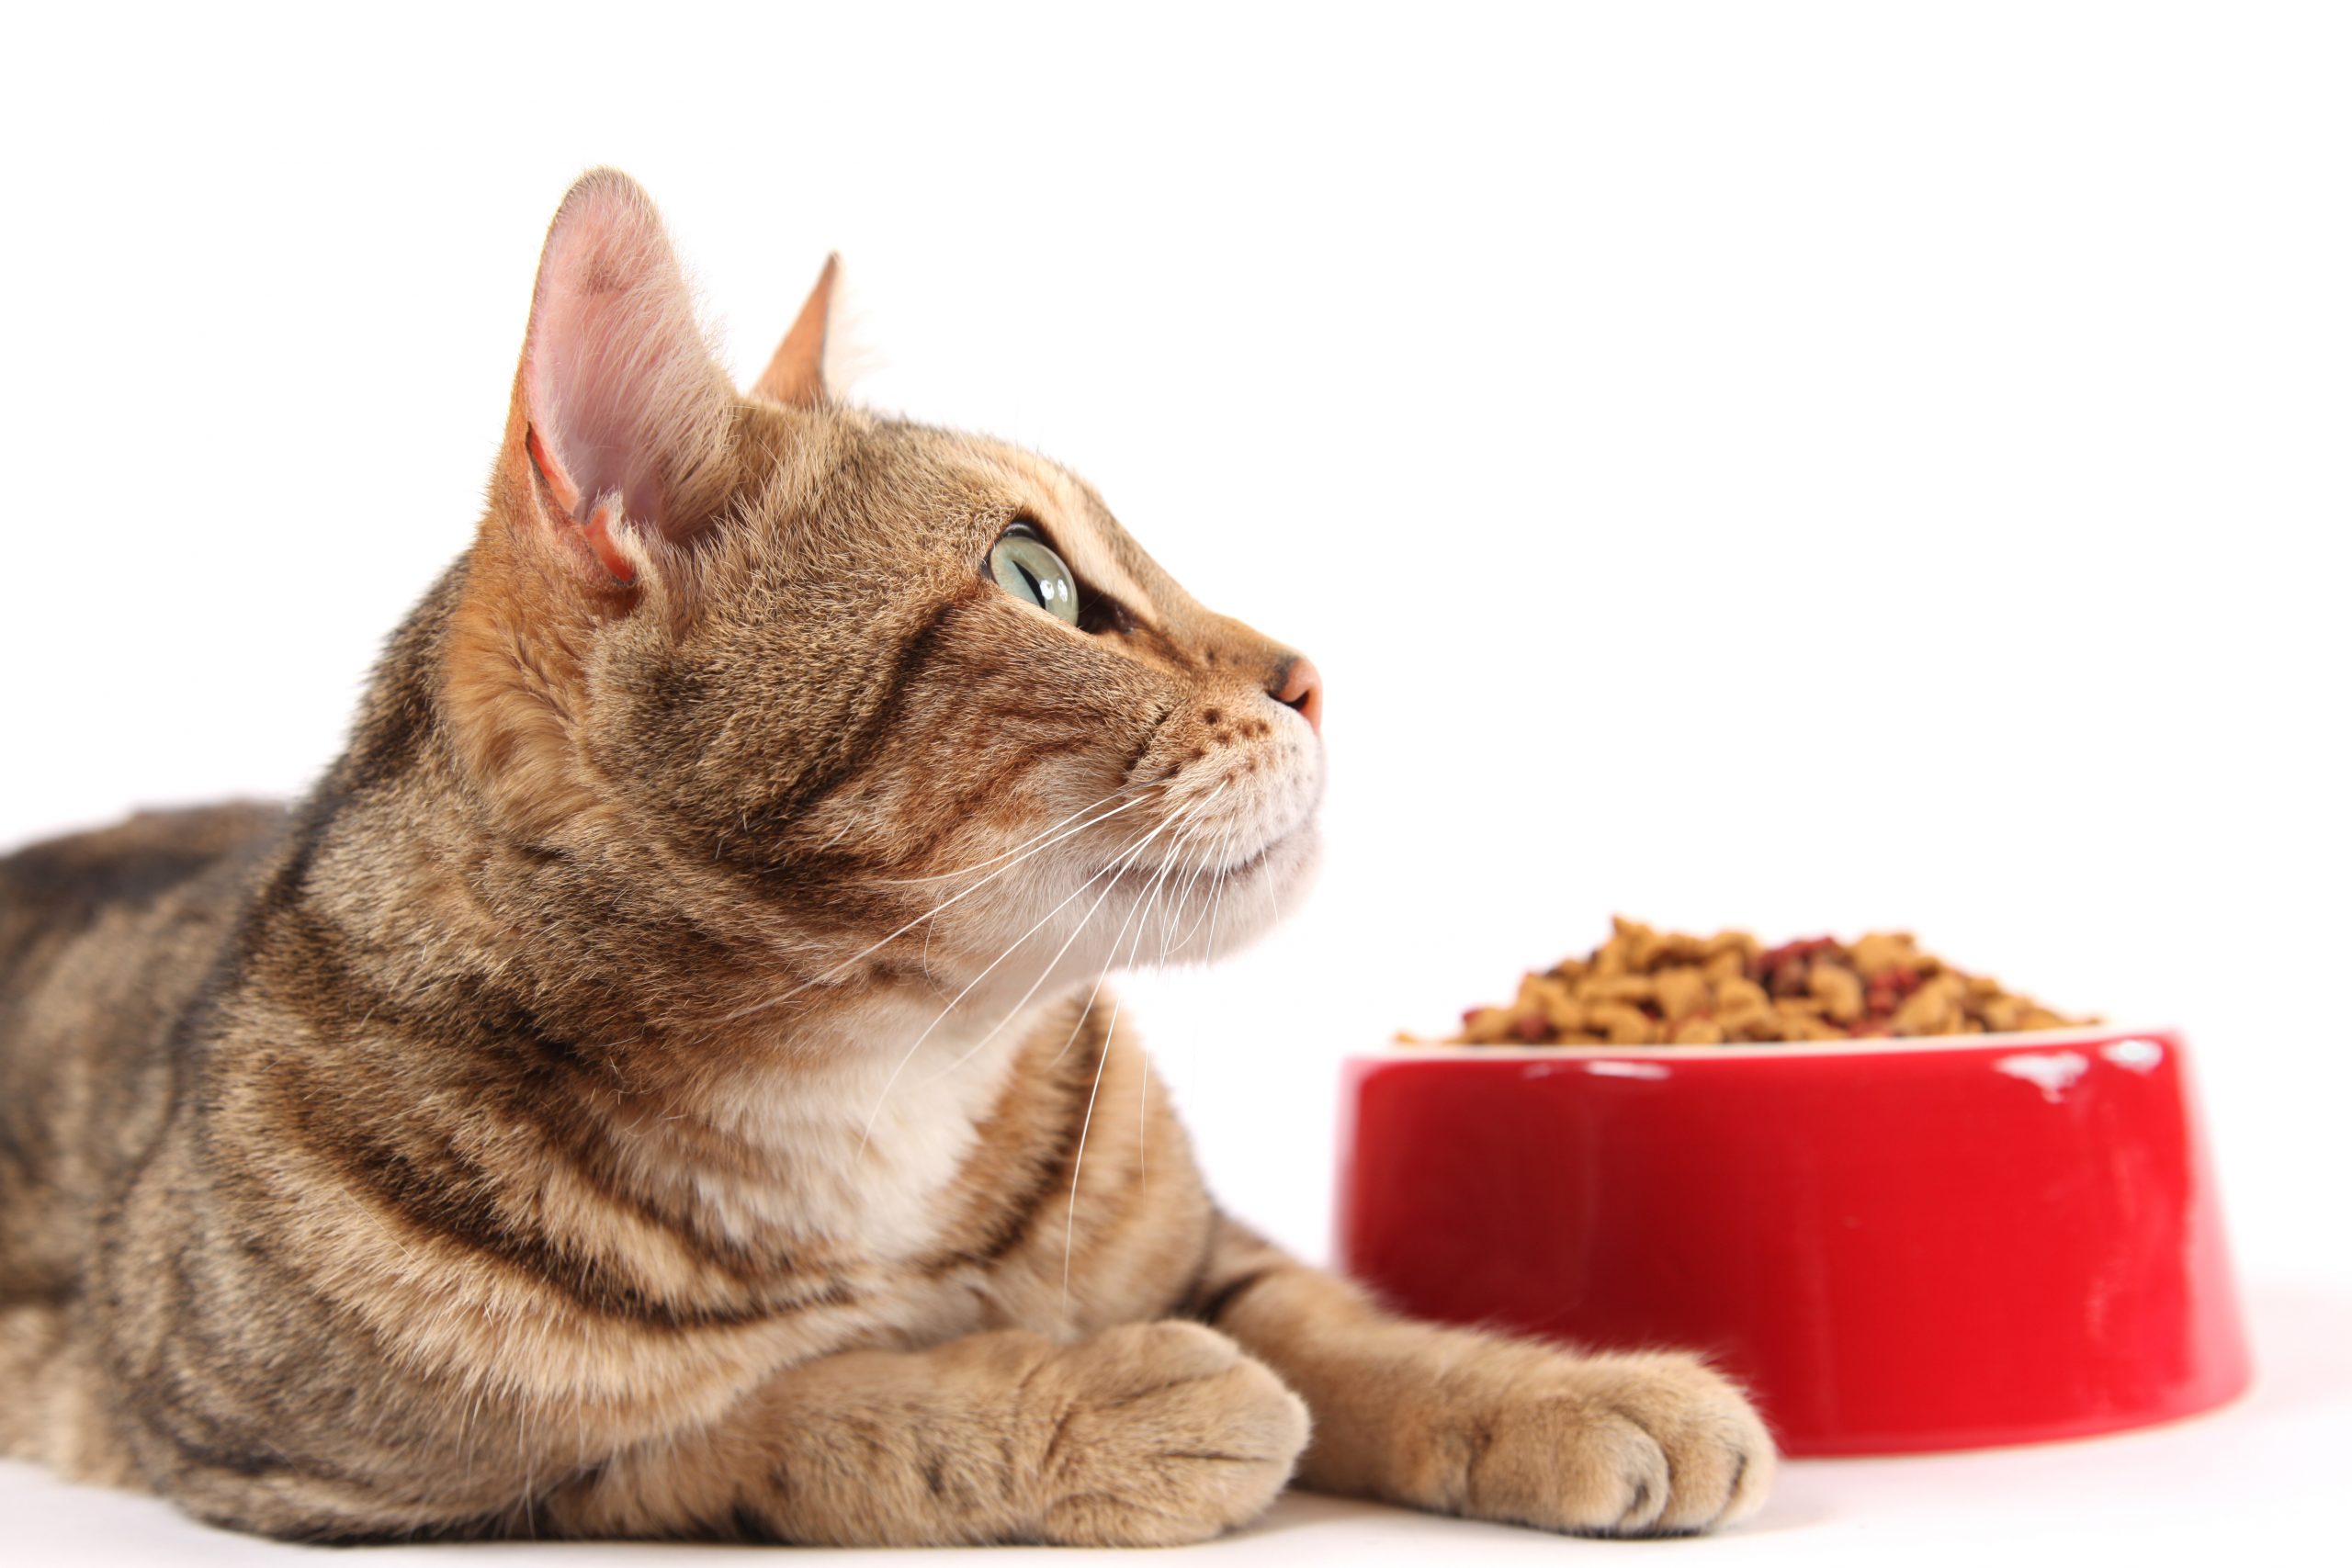 What to do to slim down obese cats? Photo: Shutterstock